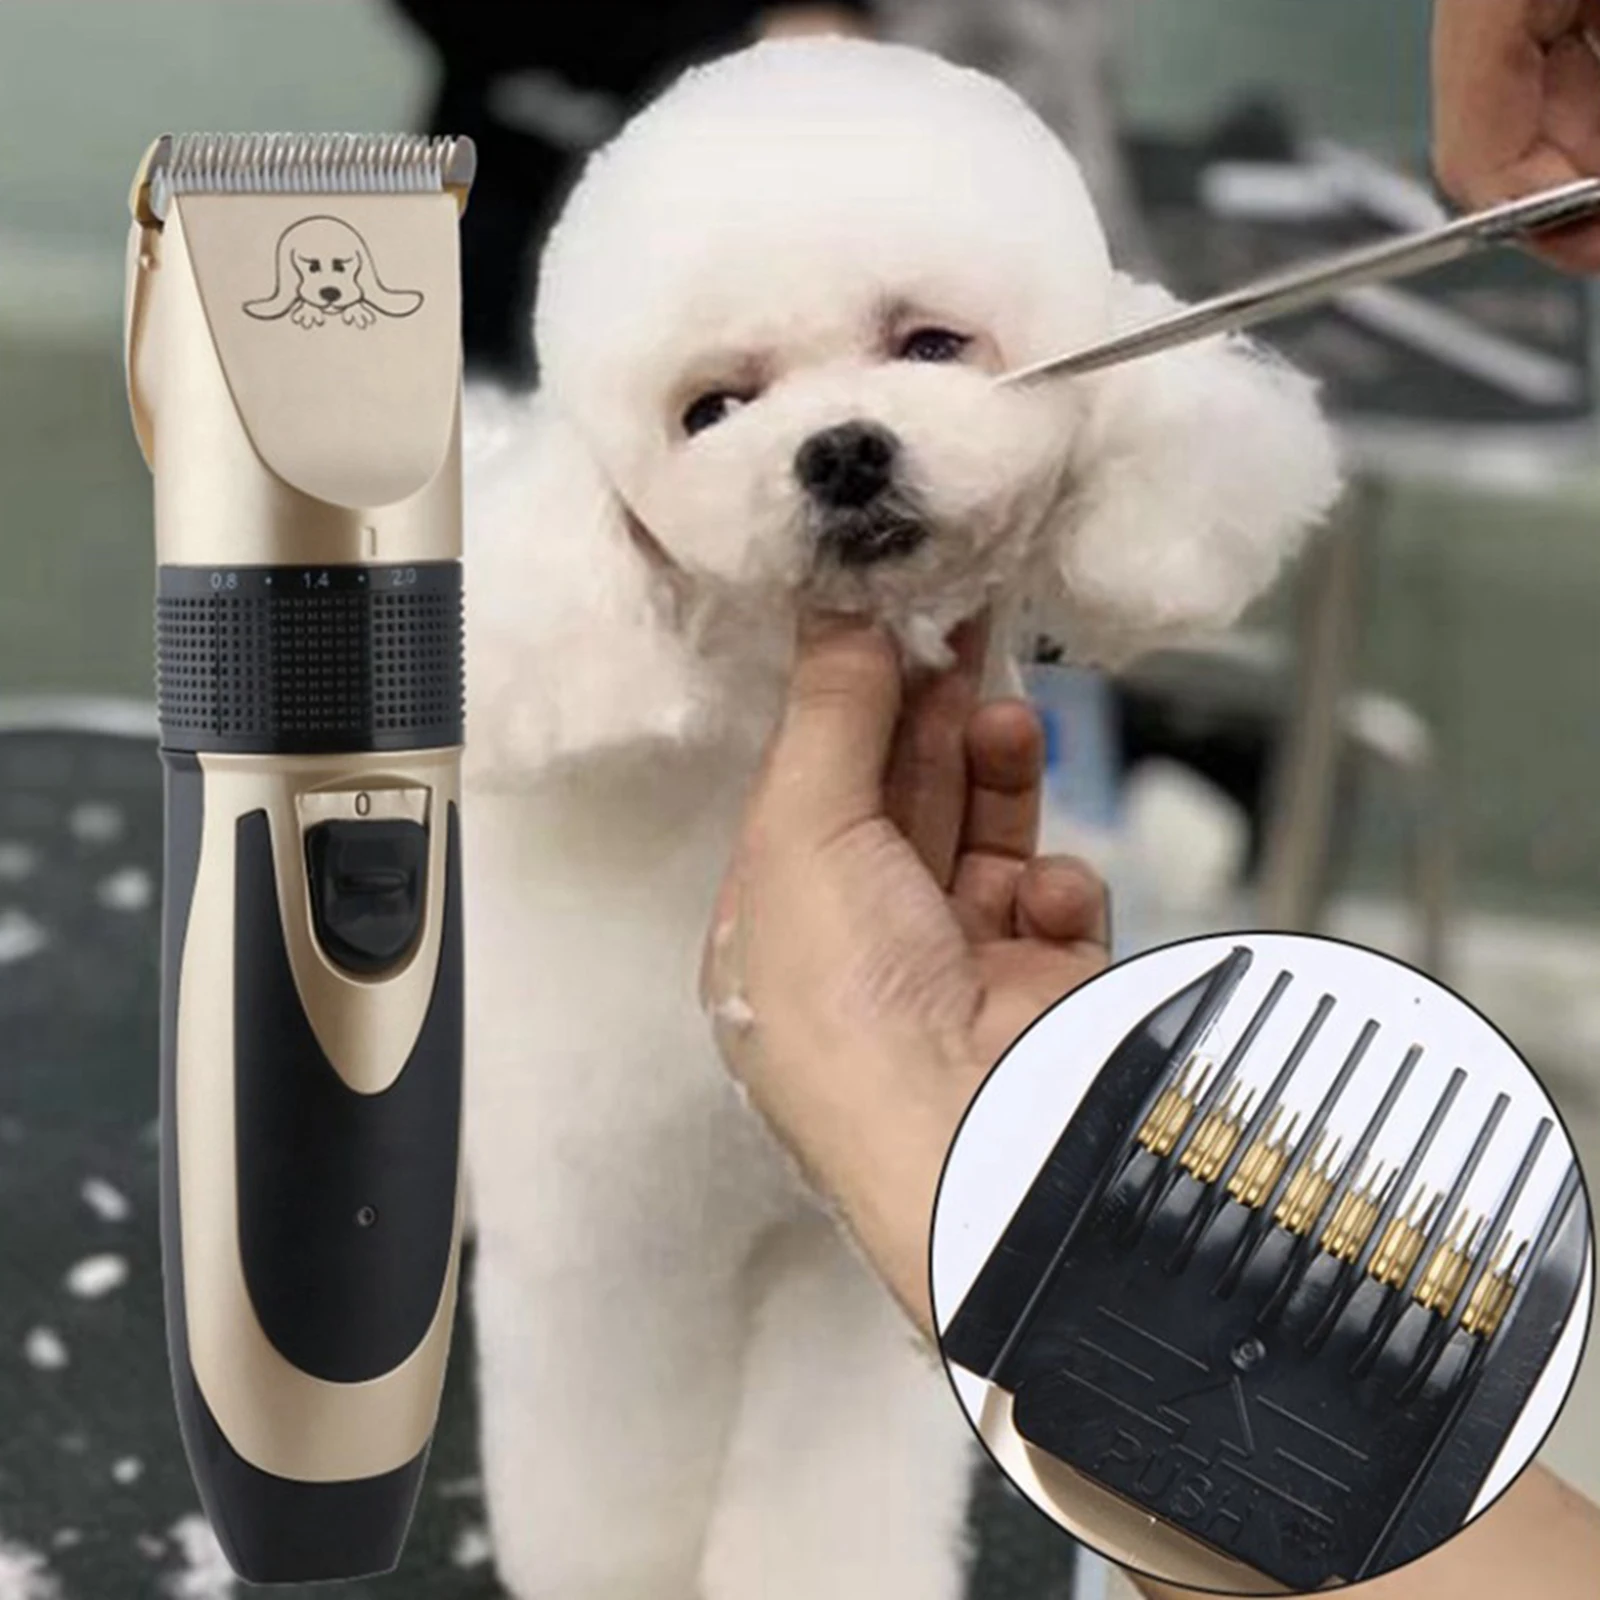 Pet Hair Thick Coats Clippers Trimmers Set for Dogs, Cats,Other Pets Animals